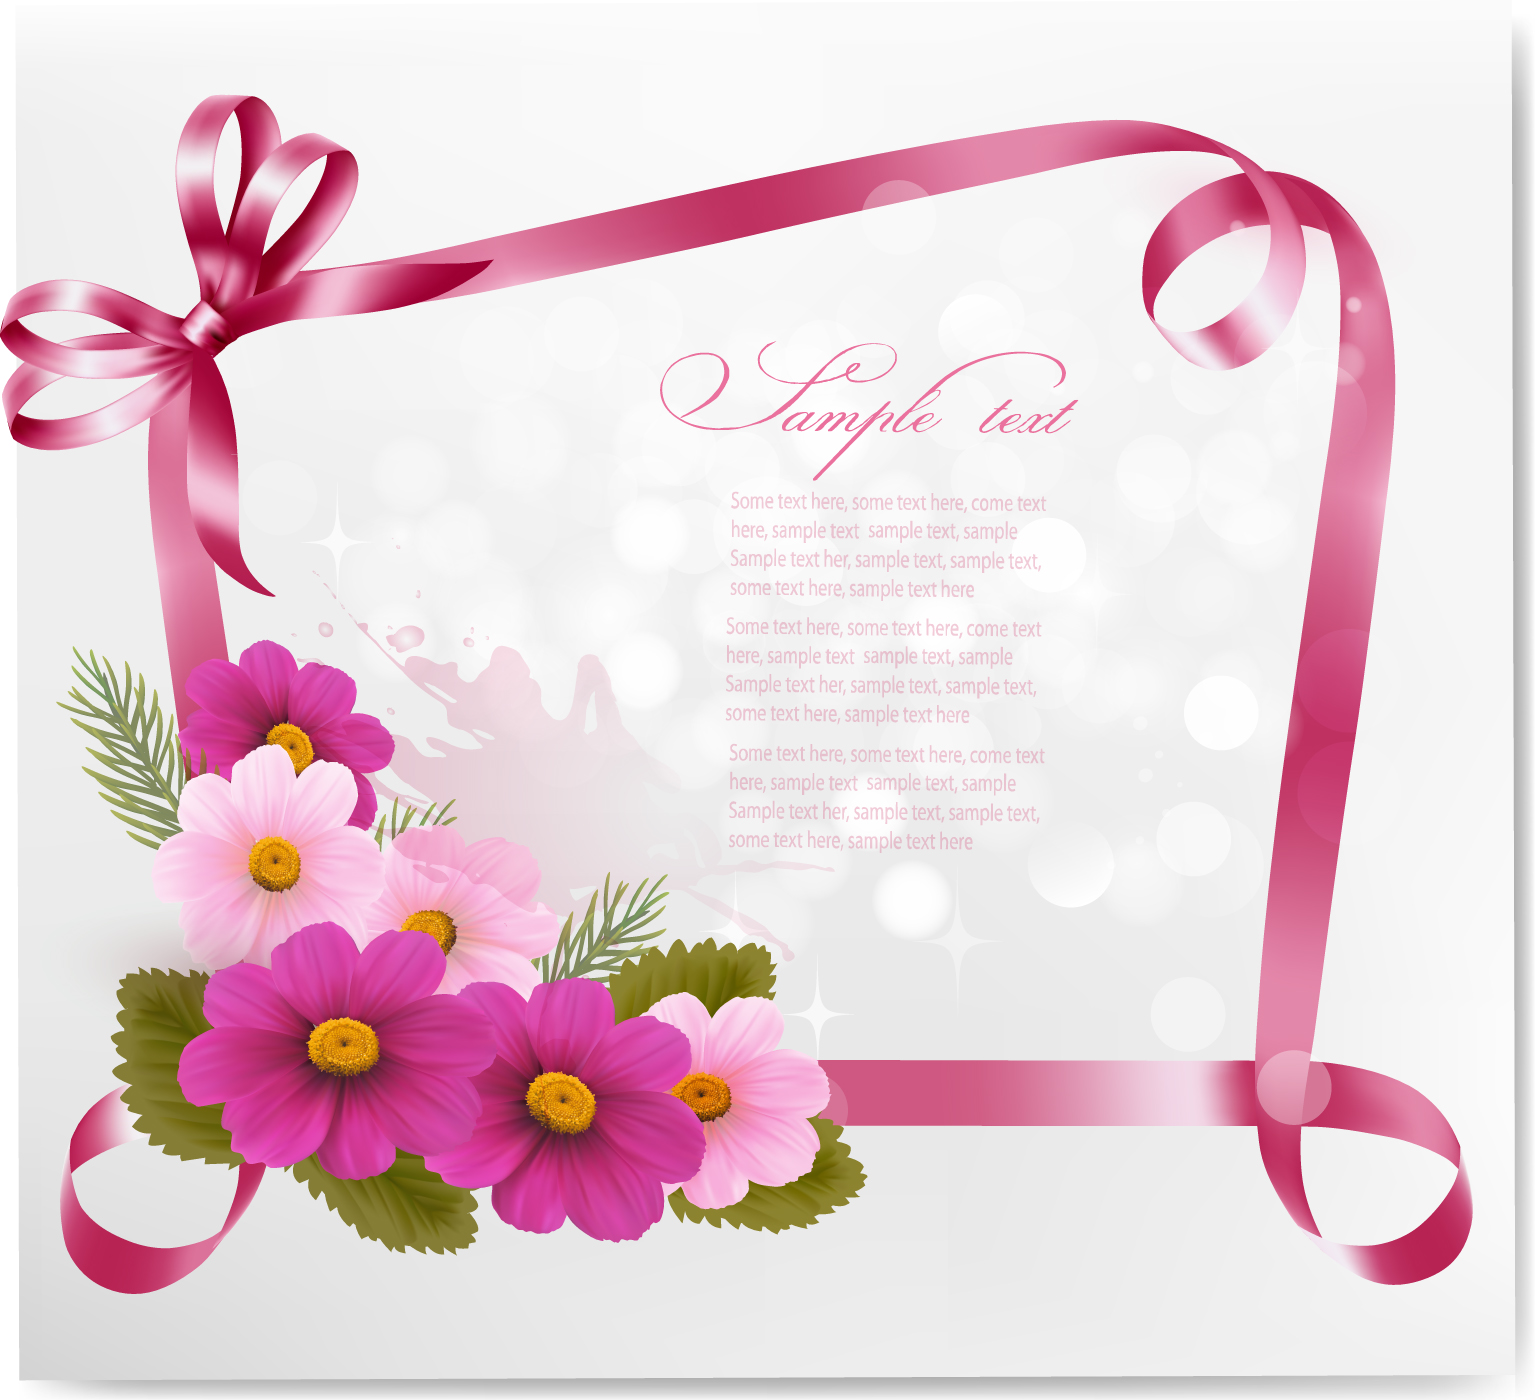 Vector Flower Free Vector Graphic Art Free Psd Graphic Free Icons Photoshop Brush Font